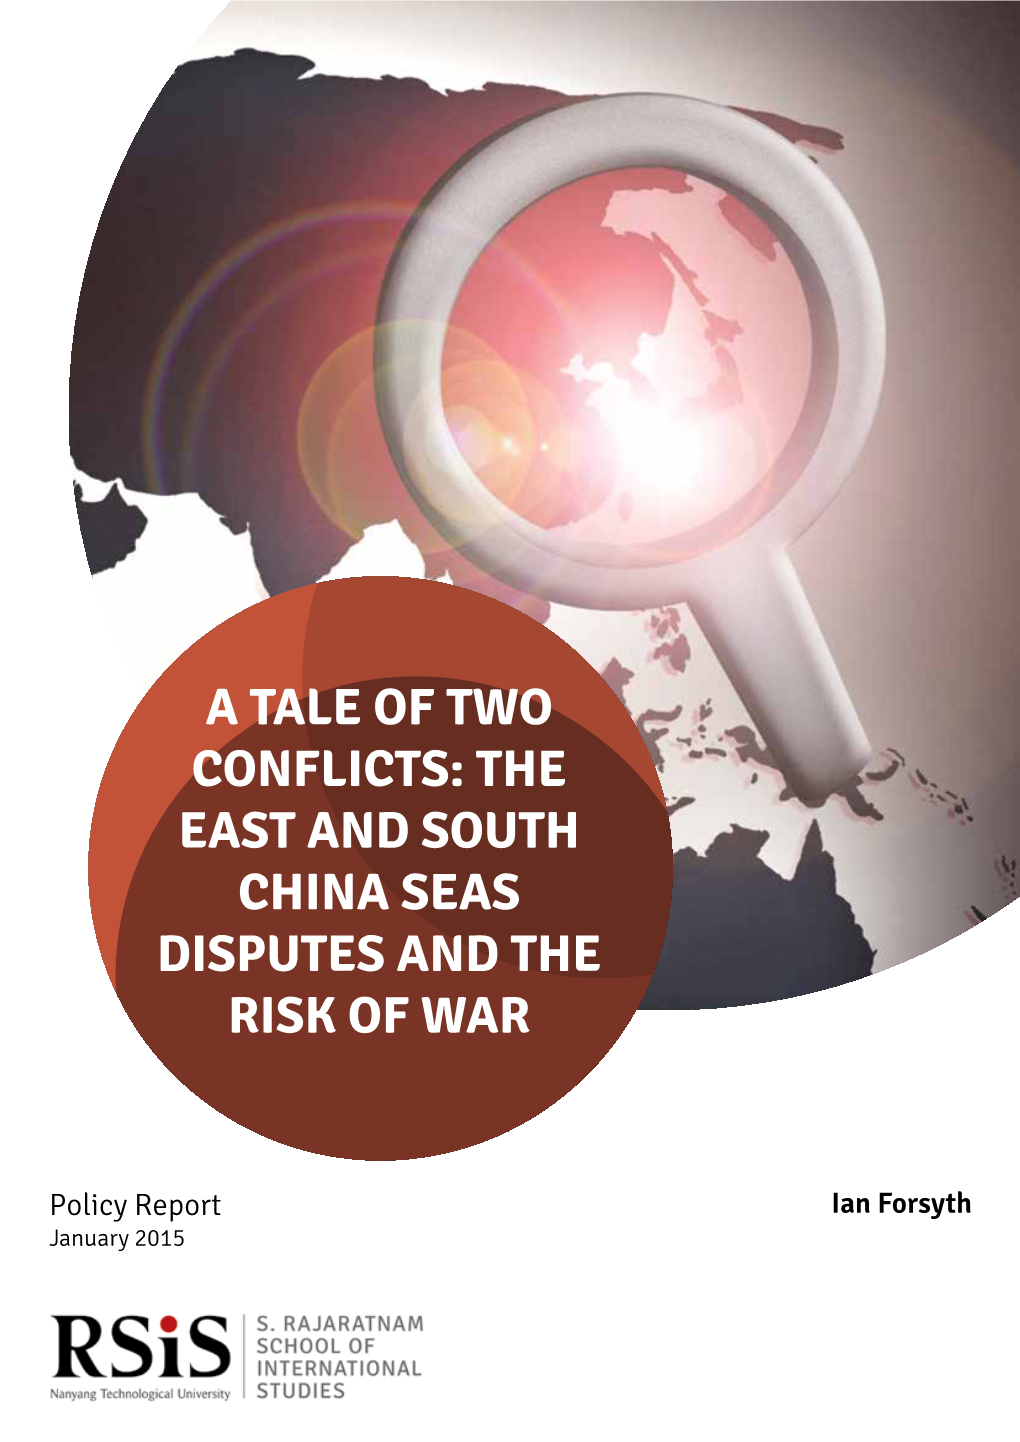 A Tale of Two Conflicts: the East and South China Seas Disputes and the Risk of War